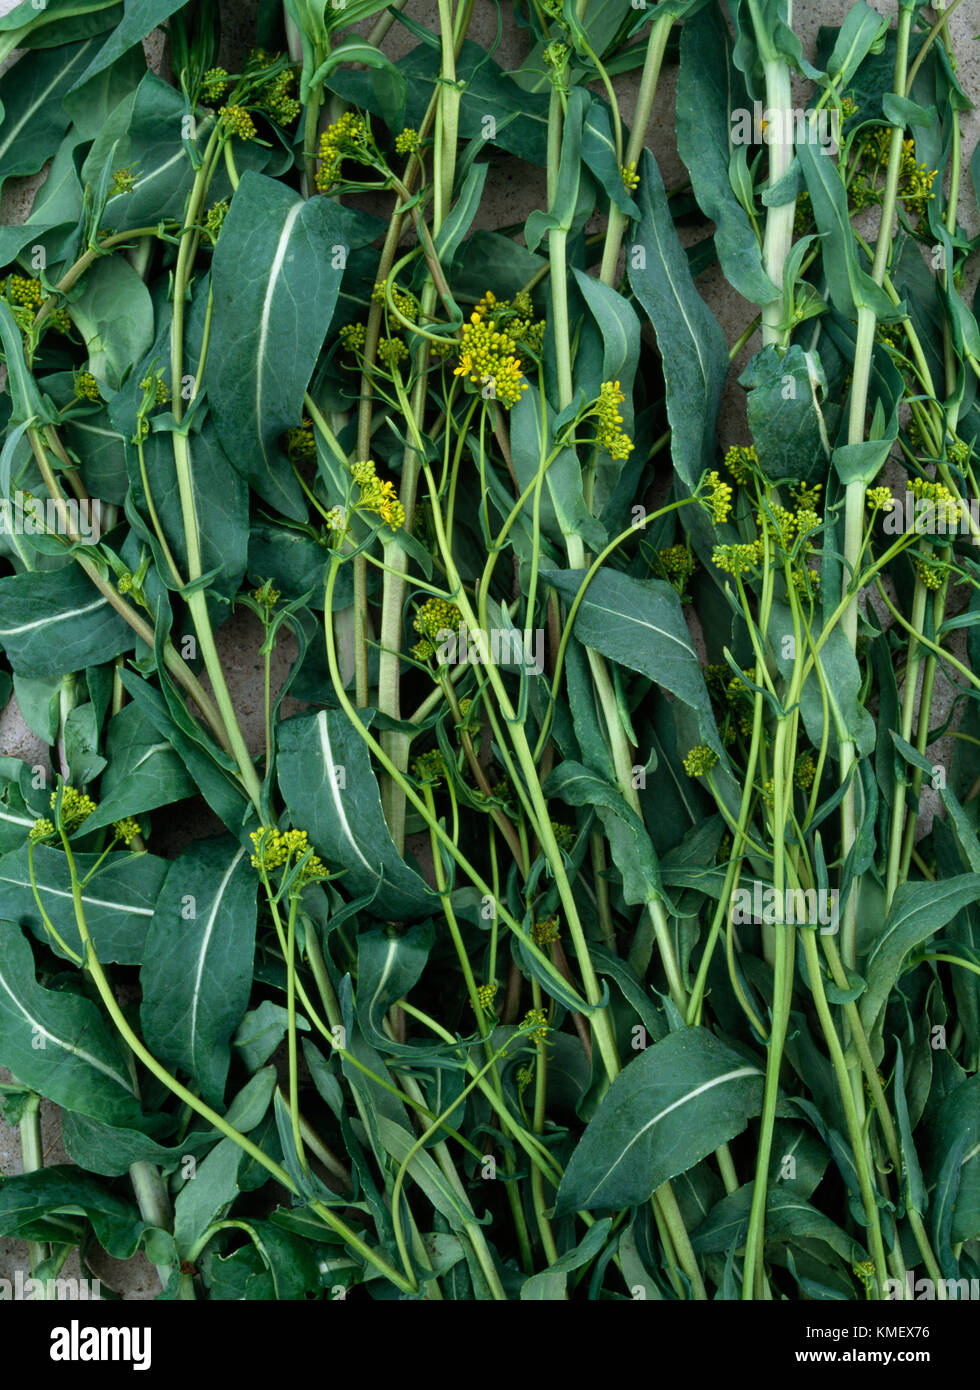 Isatis tinctoria, also called Dyer's Woad, Biannual brassica plant, from which blue dye Woad is made. Cut stems, leaves and flowers. Stock Photo